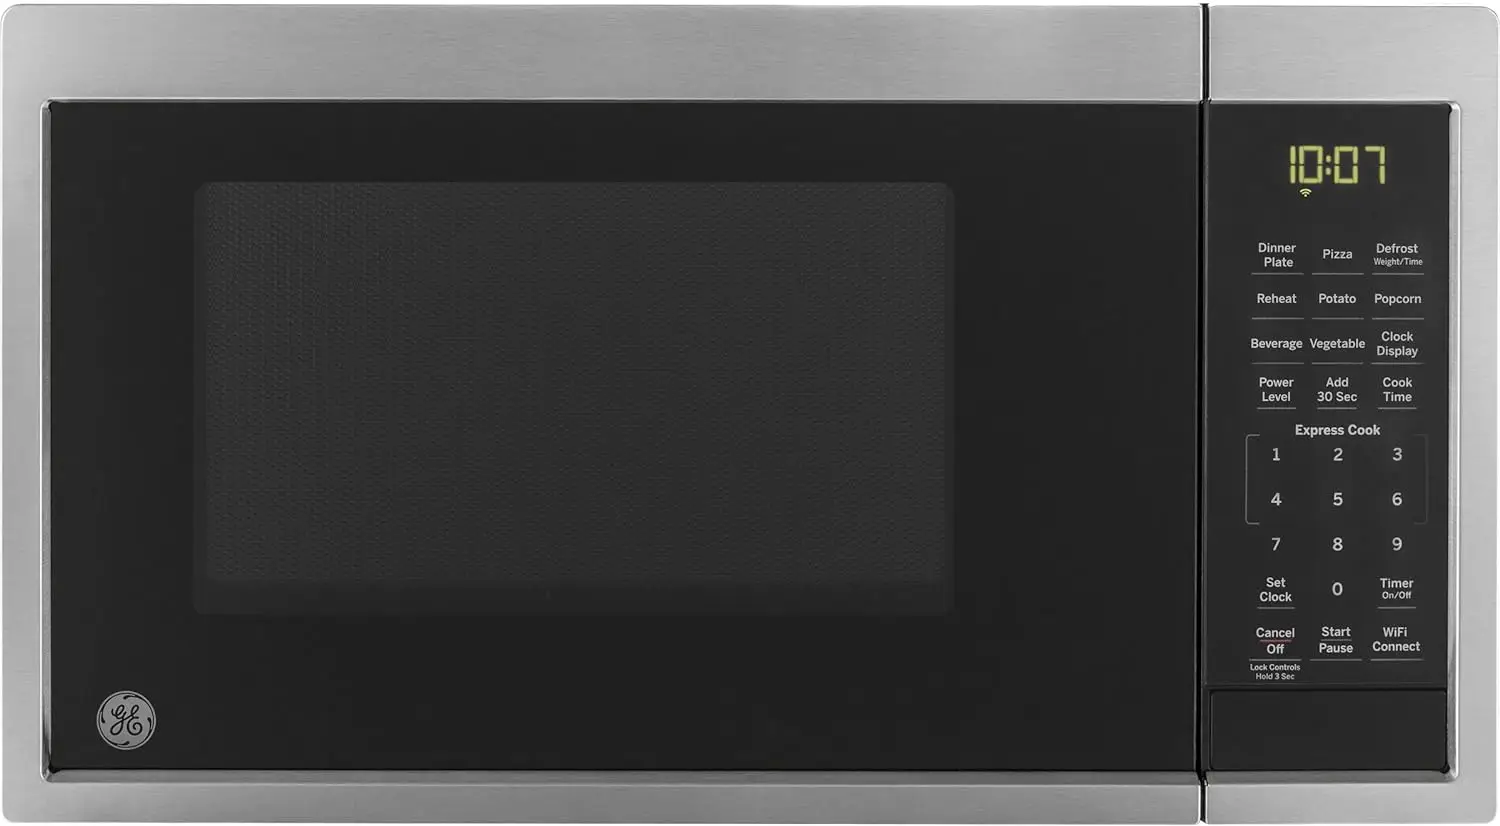 

Countertop Microwave Oven | Complete with Scan-to-Cook Technology and Wifi-Connectivity | 0.9 Cubic Feet Capacity, 900 Watts | S